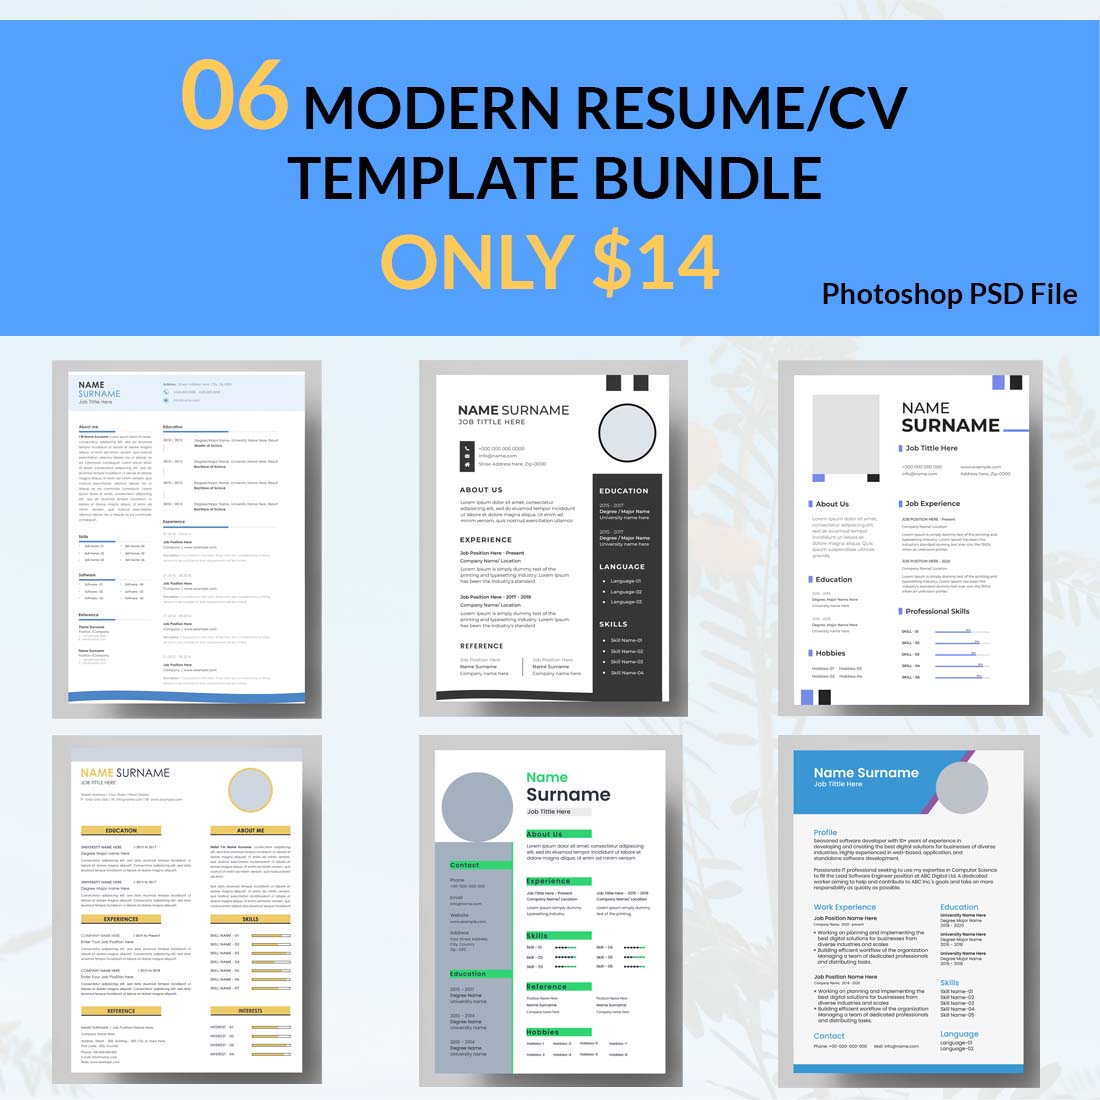 06 MODERN RESUME/CV TEMPLATE BUNDLE ONLY $14 preview image.